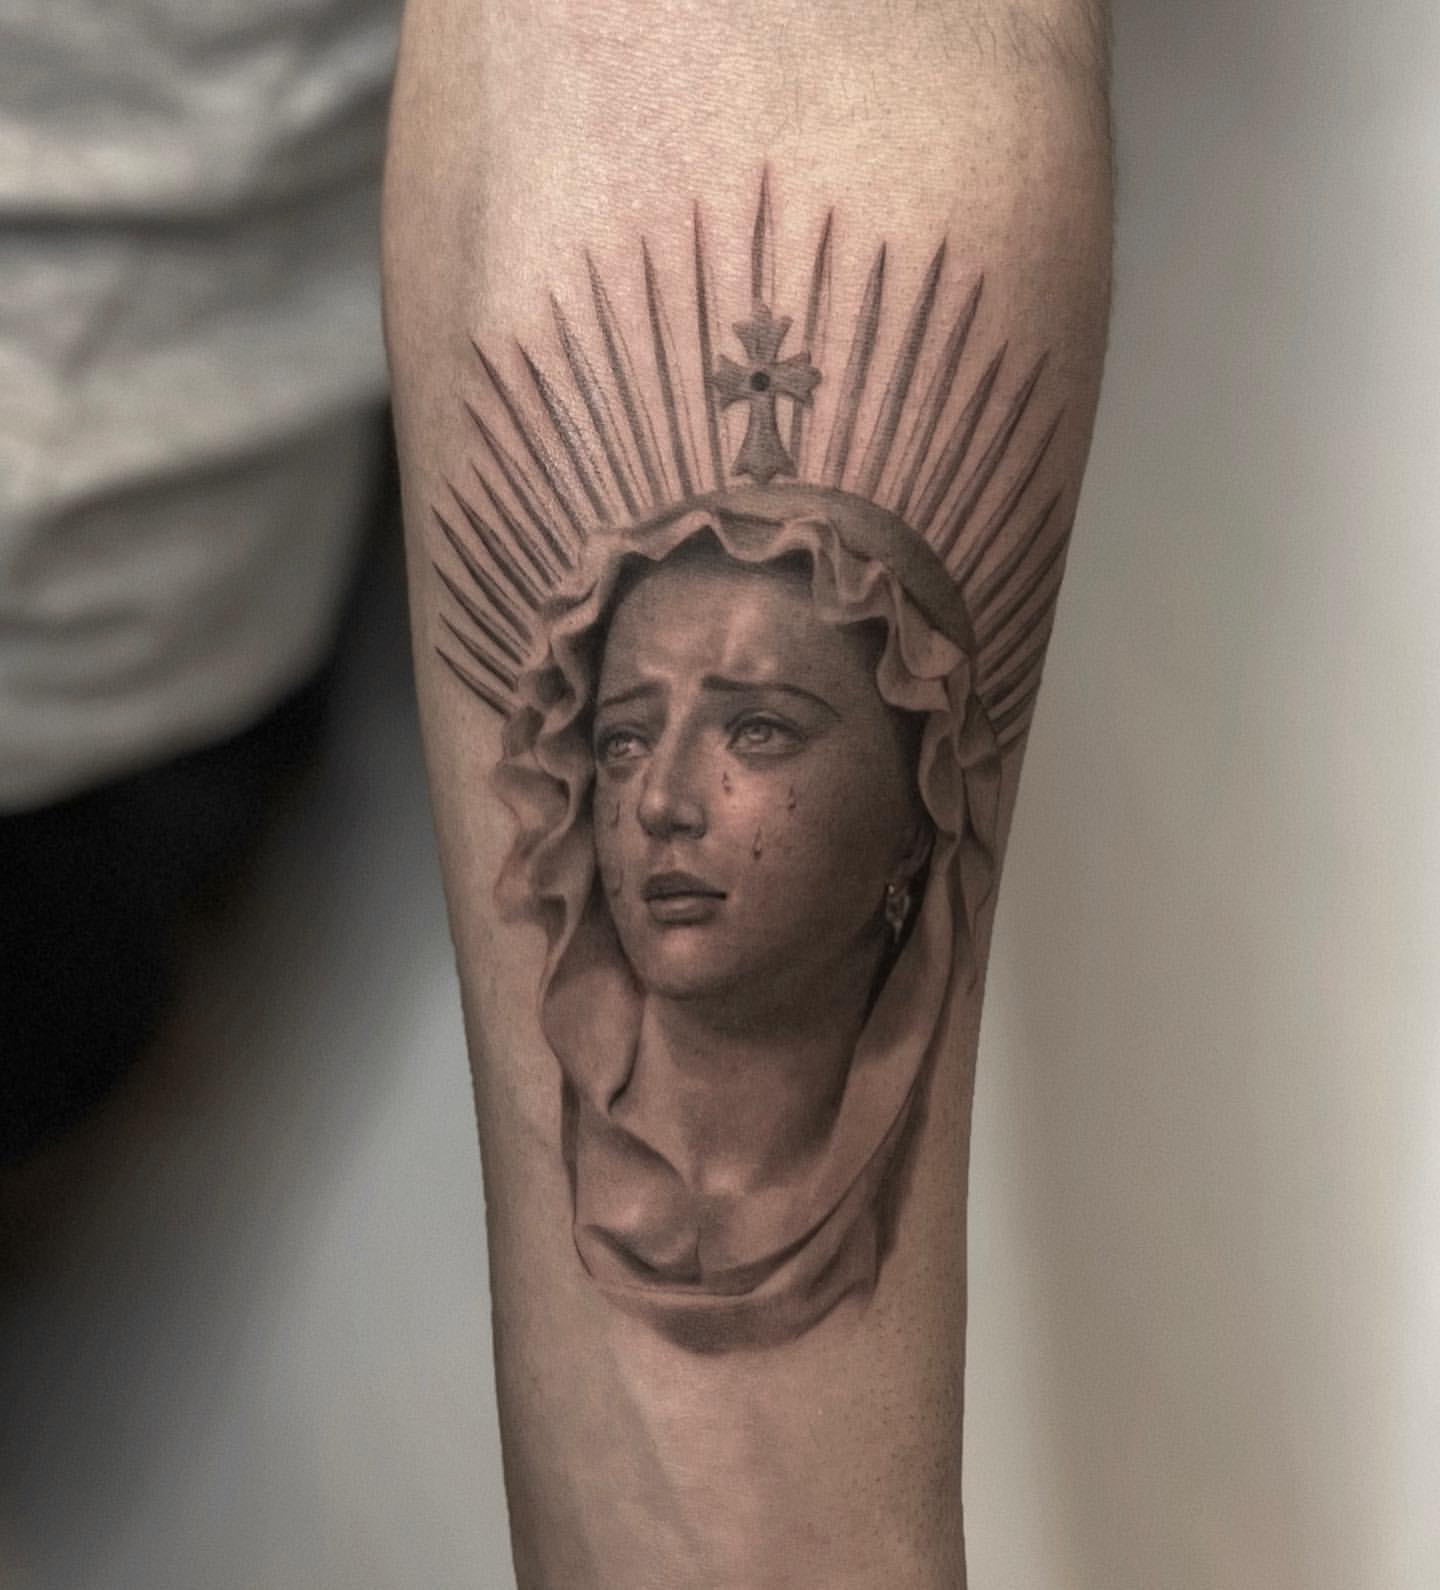 Temporary Catholic Tattoos by Motherboards | Motherboards